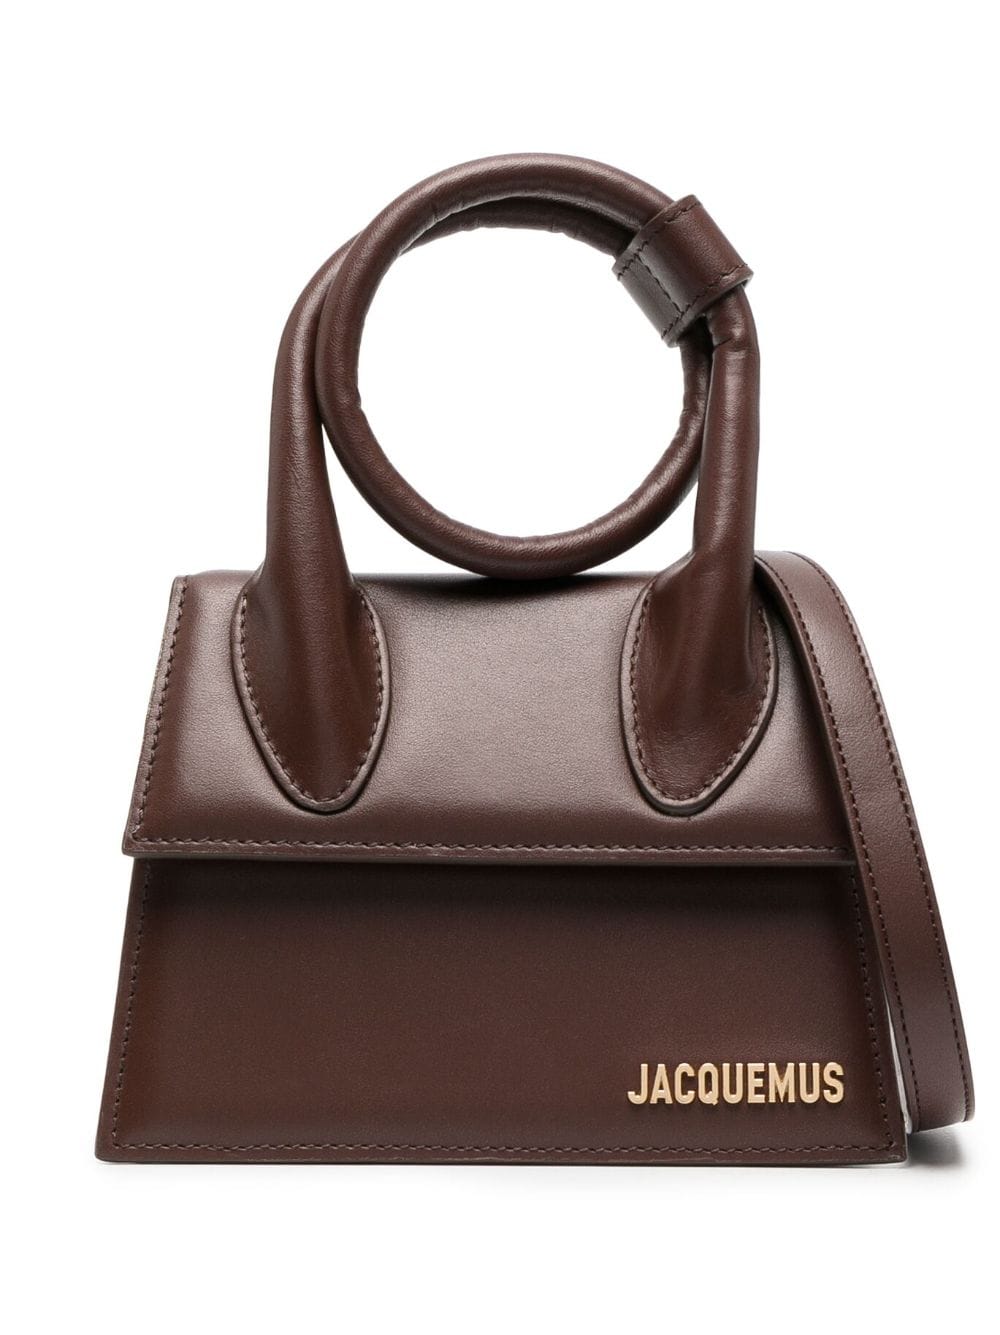 Jacquemus Le Chiquito Noeud Coiled Bag In Brown